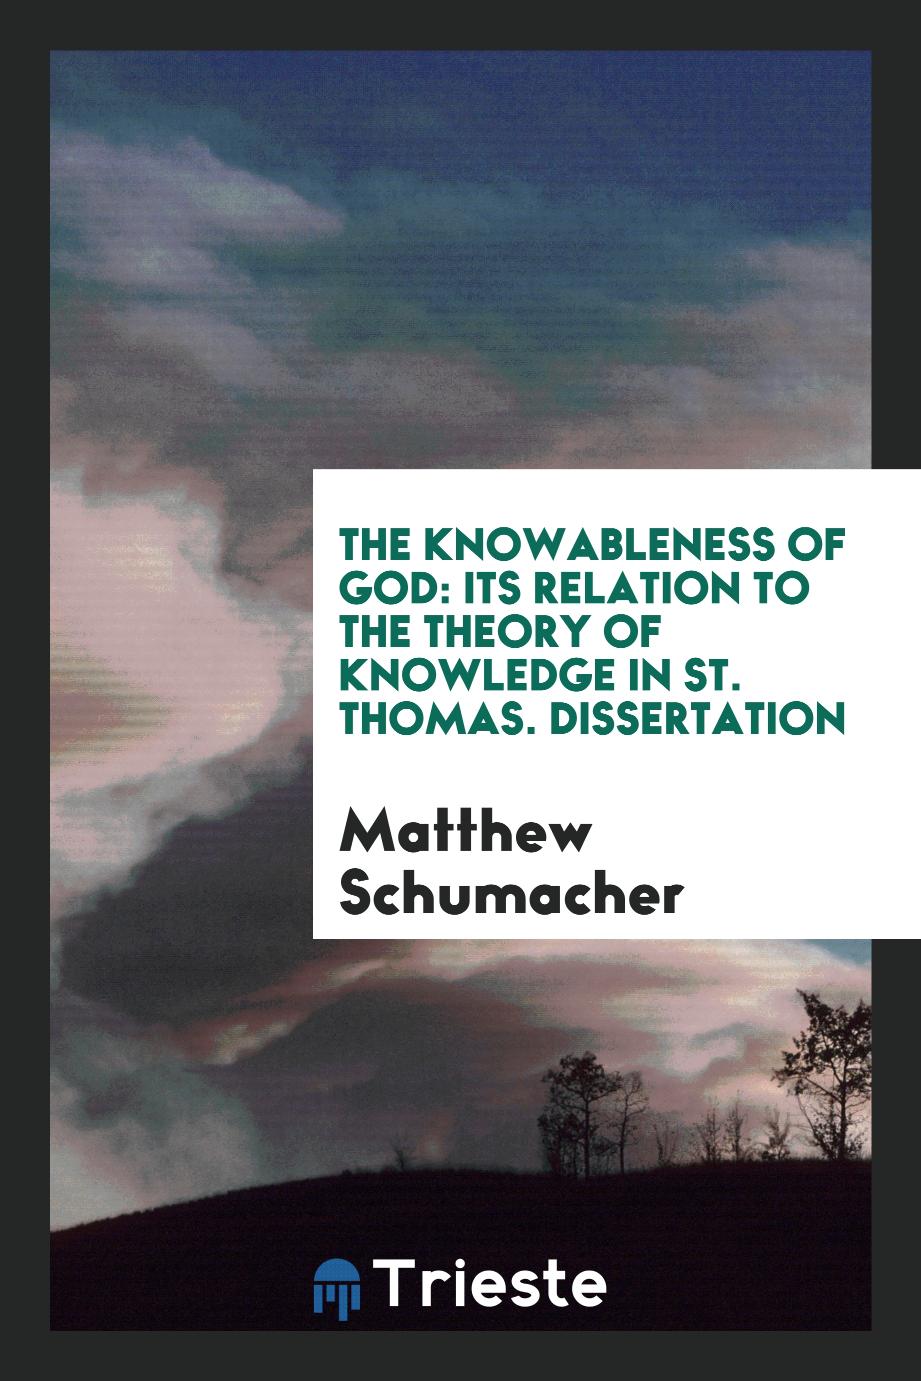 The knowableness of God: its relation to the theory of knowledge in St. Thomas. Dissertation